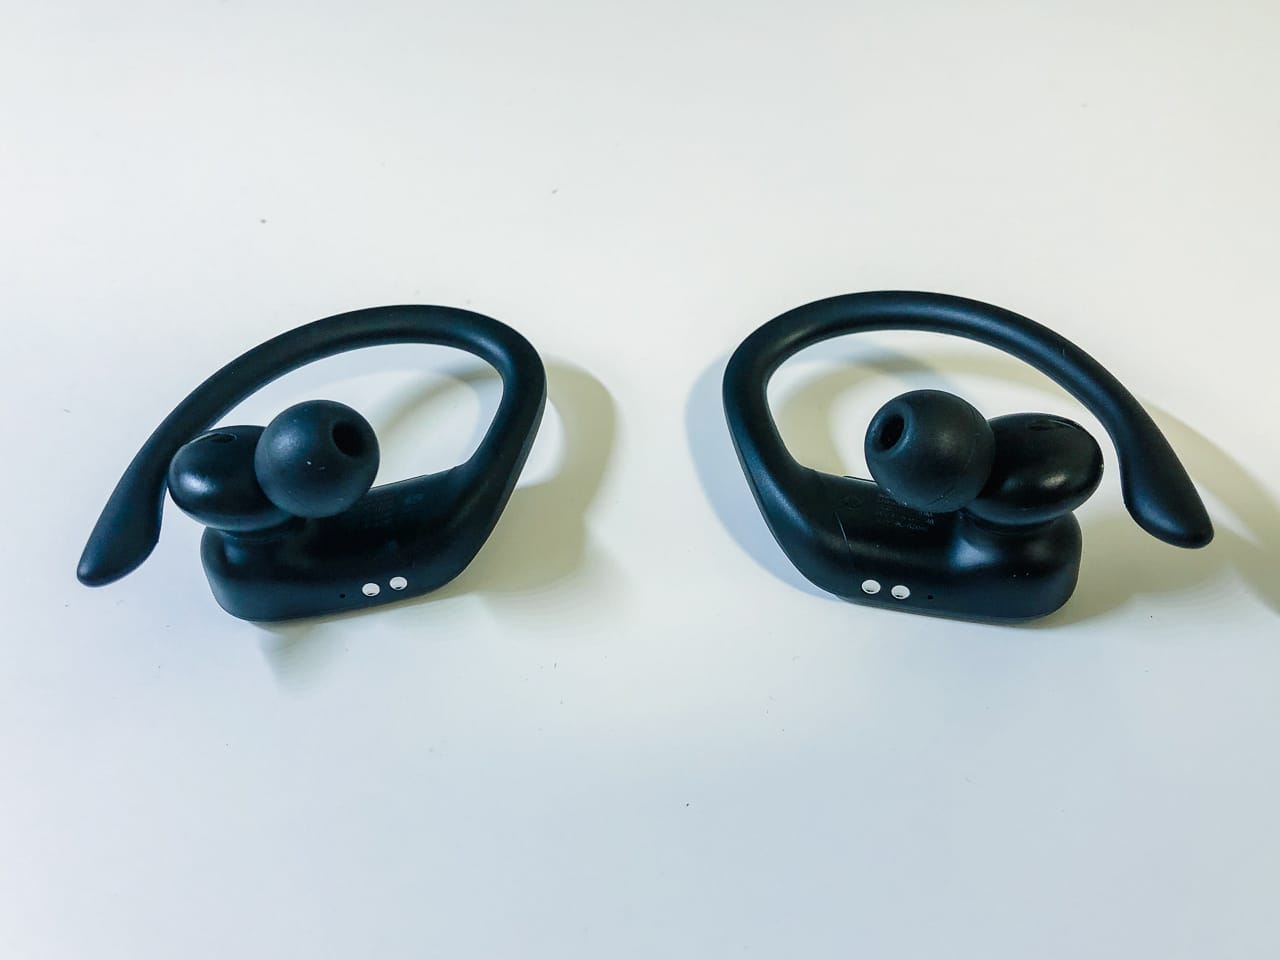 when are the powerbeats pro ivory coming out